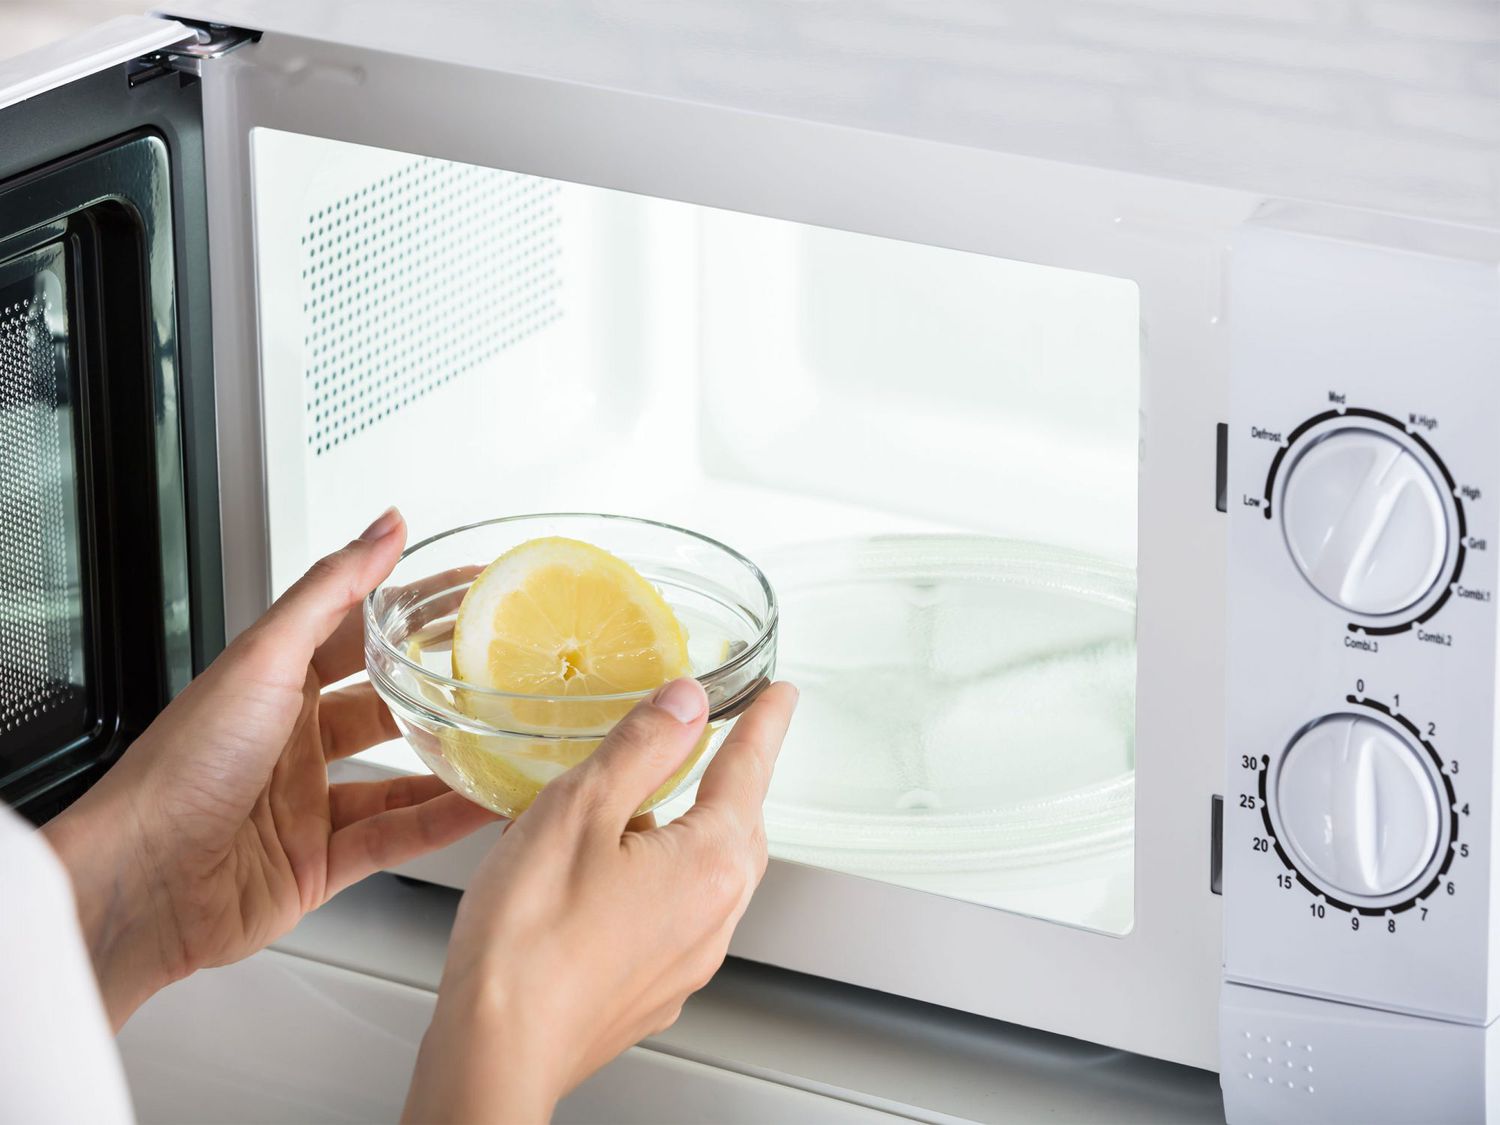 How to clean a microwave with a lemon guide